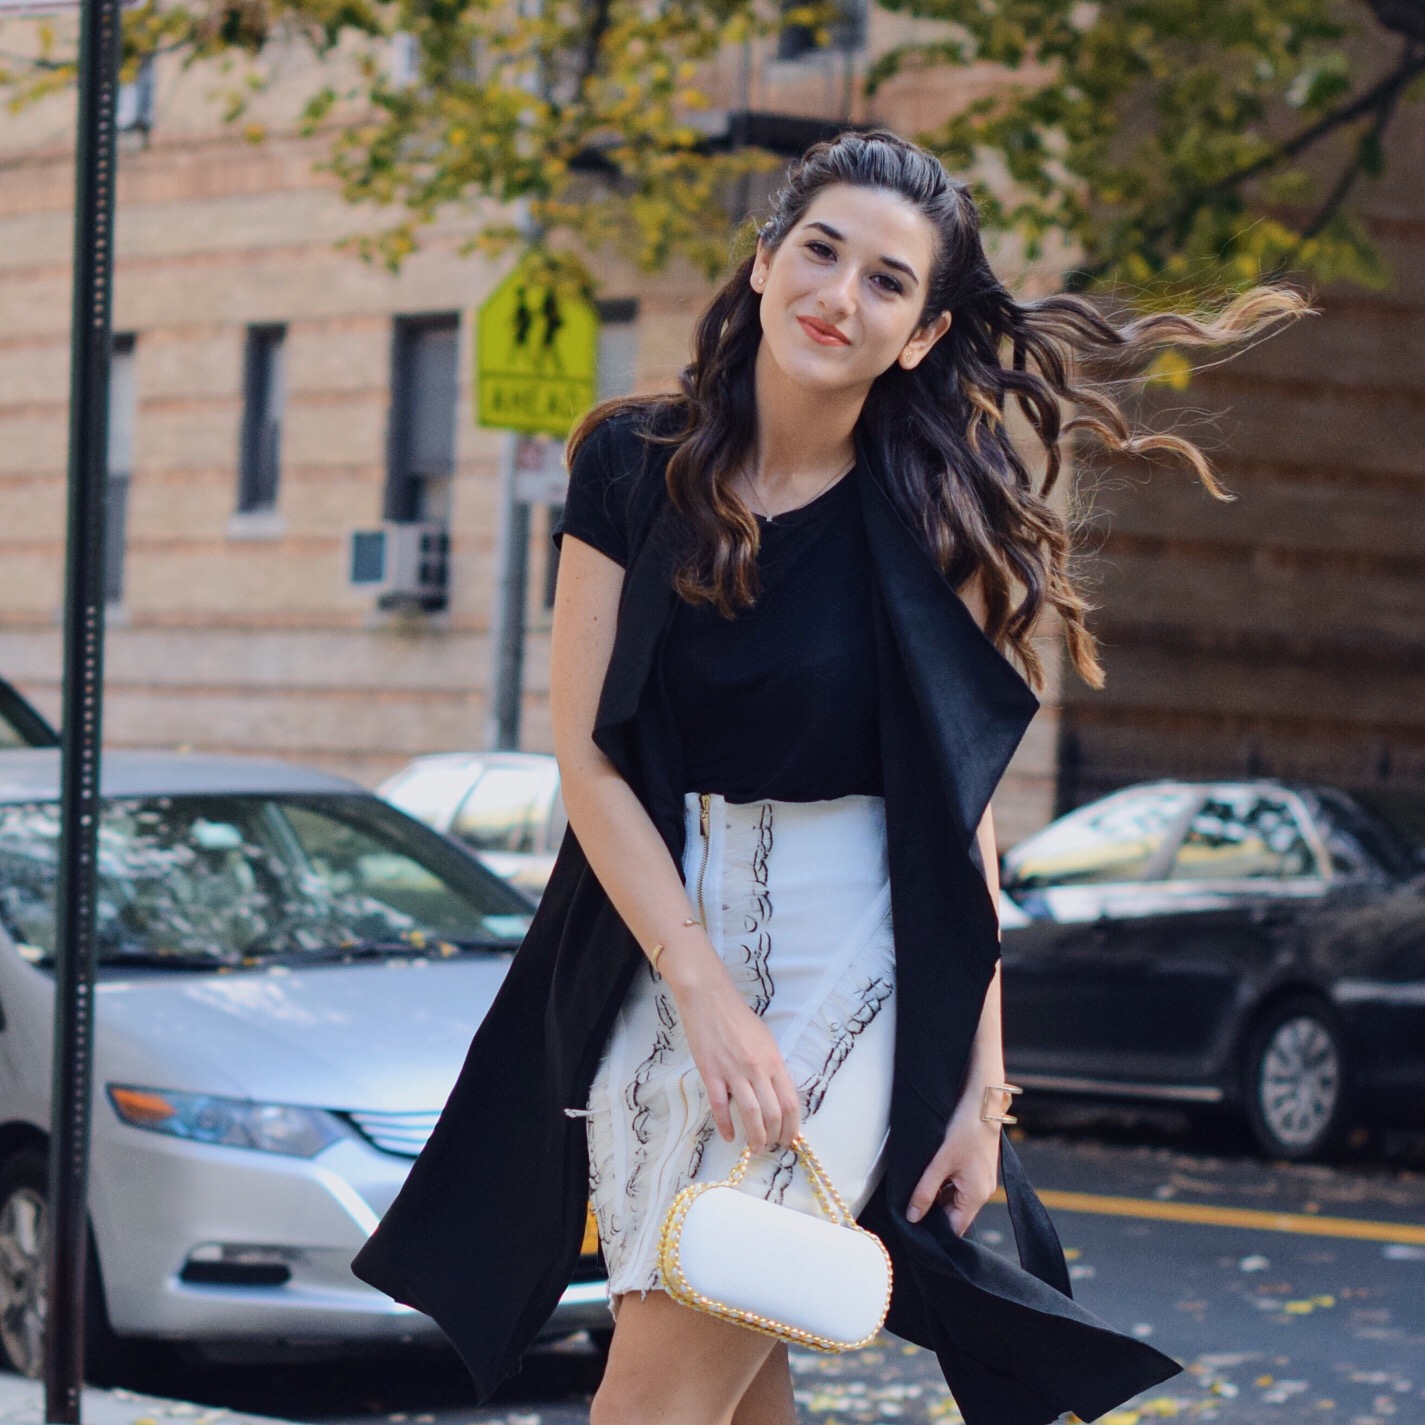 White Feather Skirt Long Black Vest Wow Couture Louboutins & Love Fashion Blog Esther Santer NYC Street Style Blogger Photoshoot Hairstyle Inspo Heels Gold Black Tee Zara Outfit OOTD Beauty Girl Women Model Fall Winter Look Erin Dana White Minaudiere.JPG